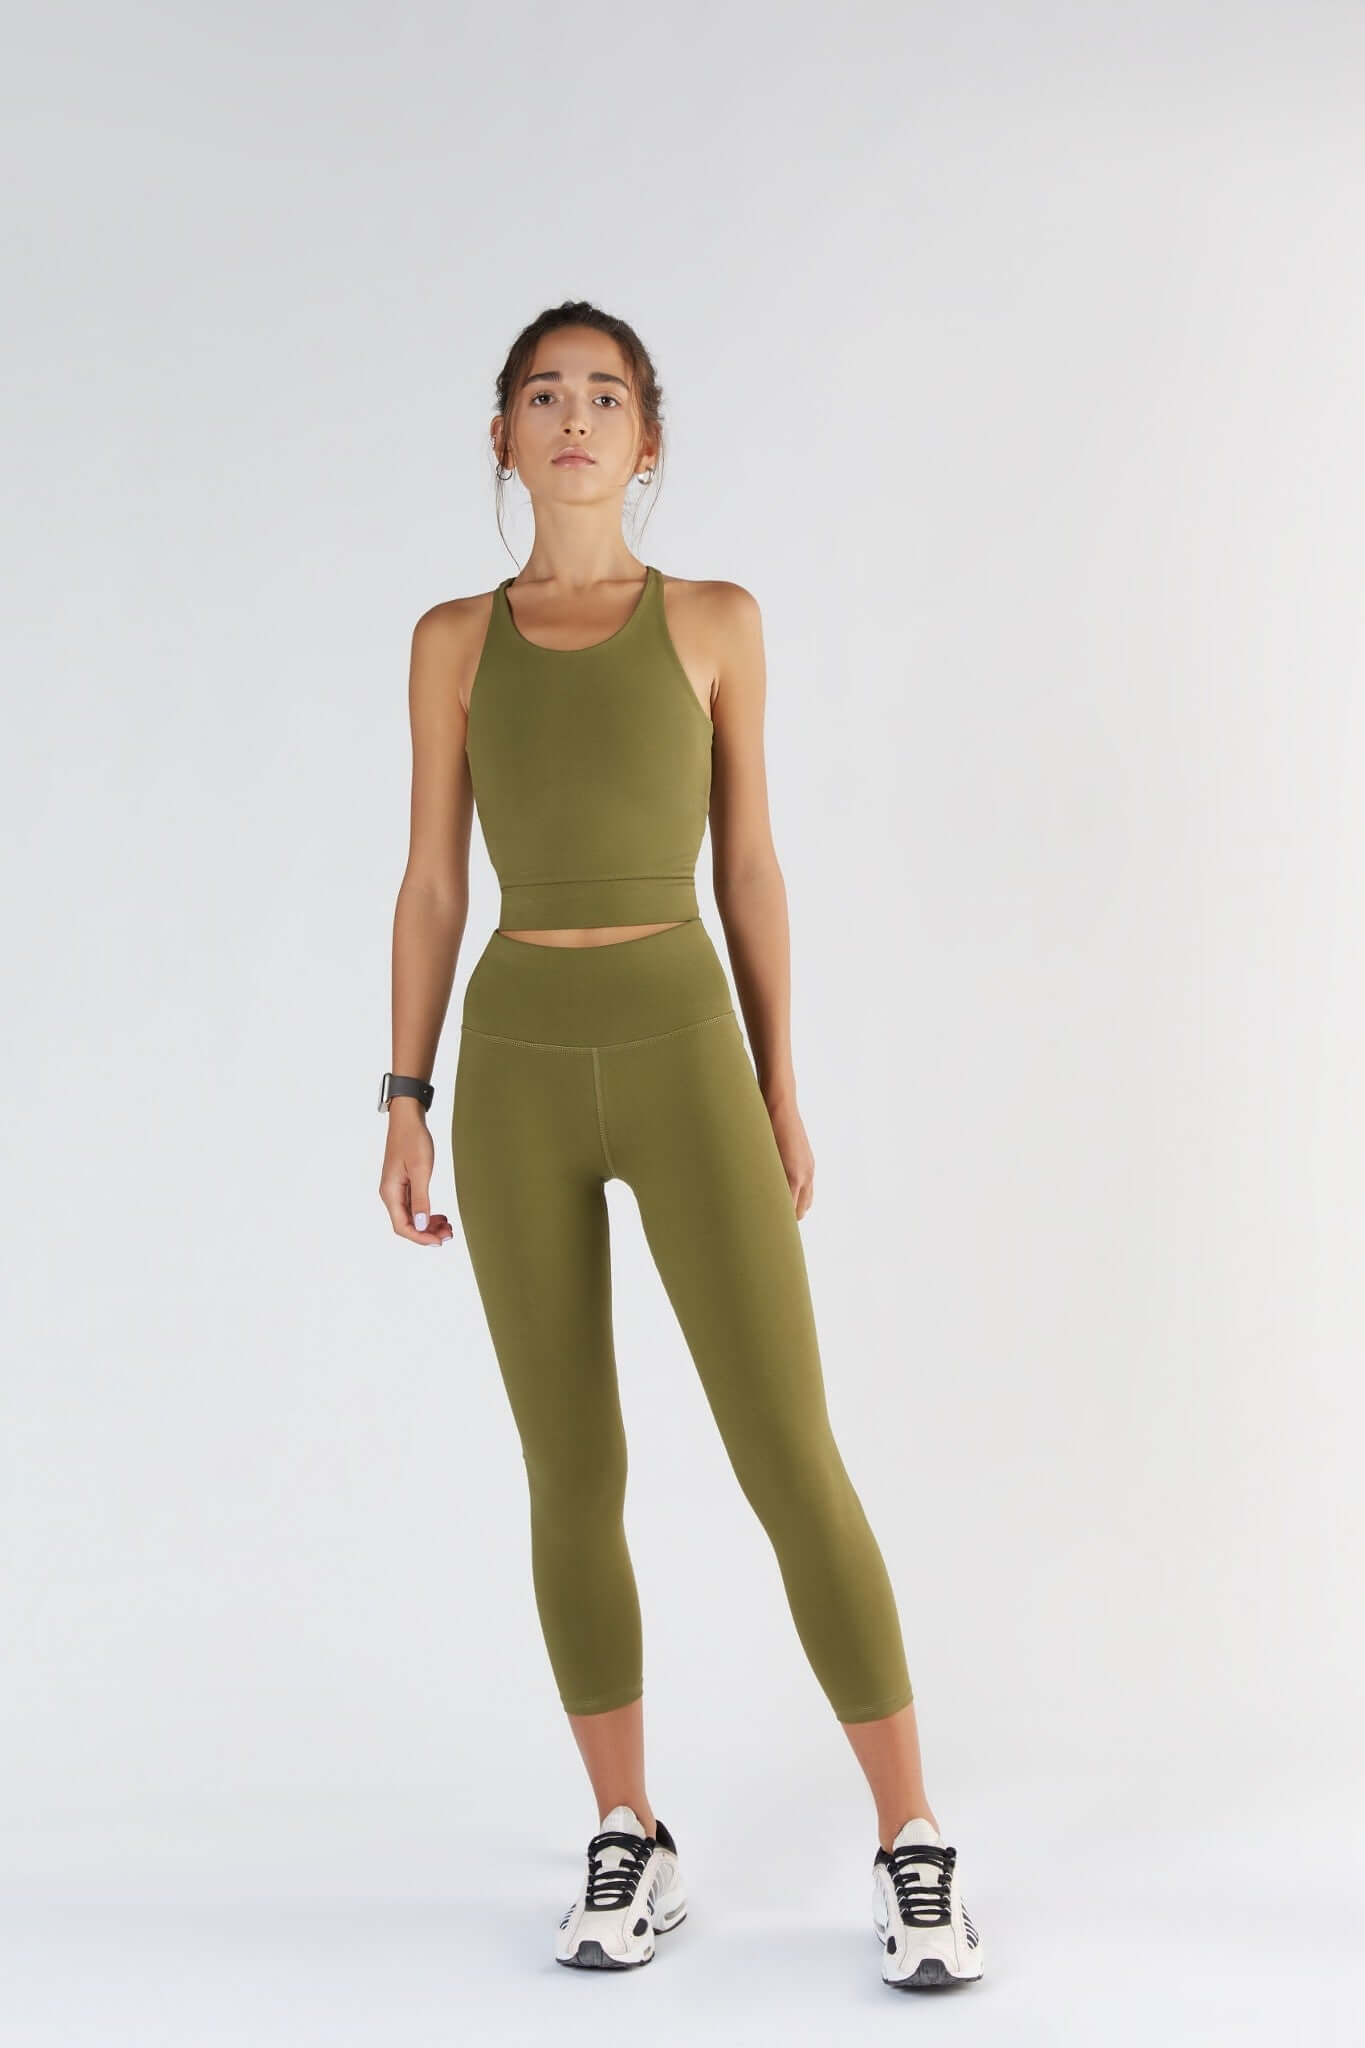 A woman posing with a Olive color clothing.